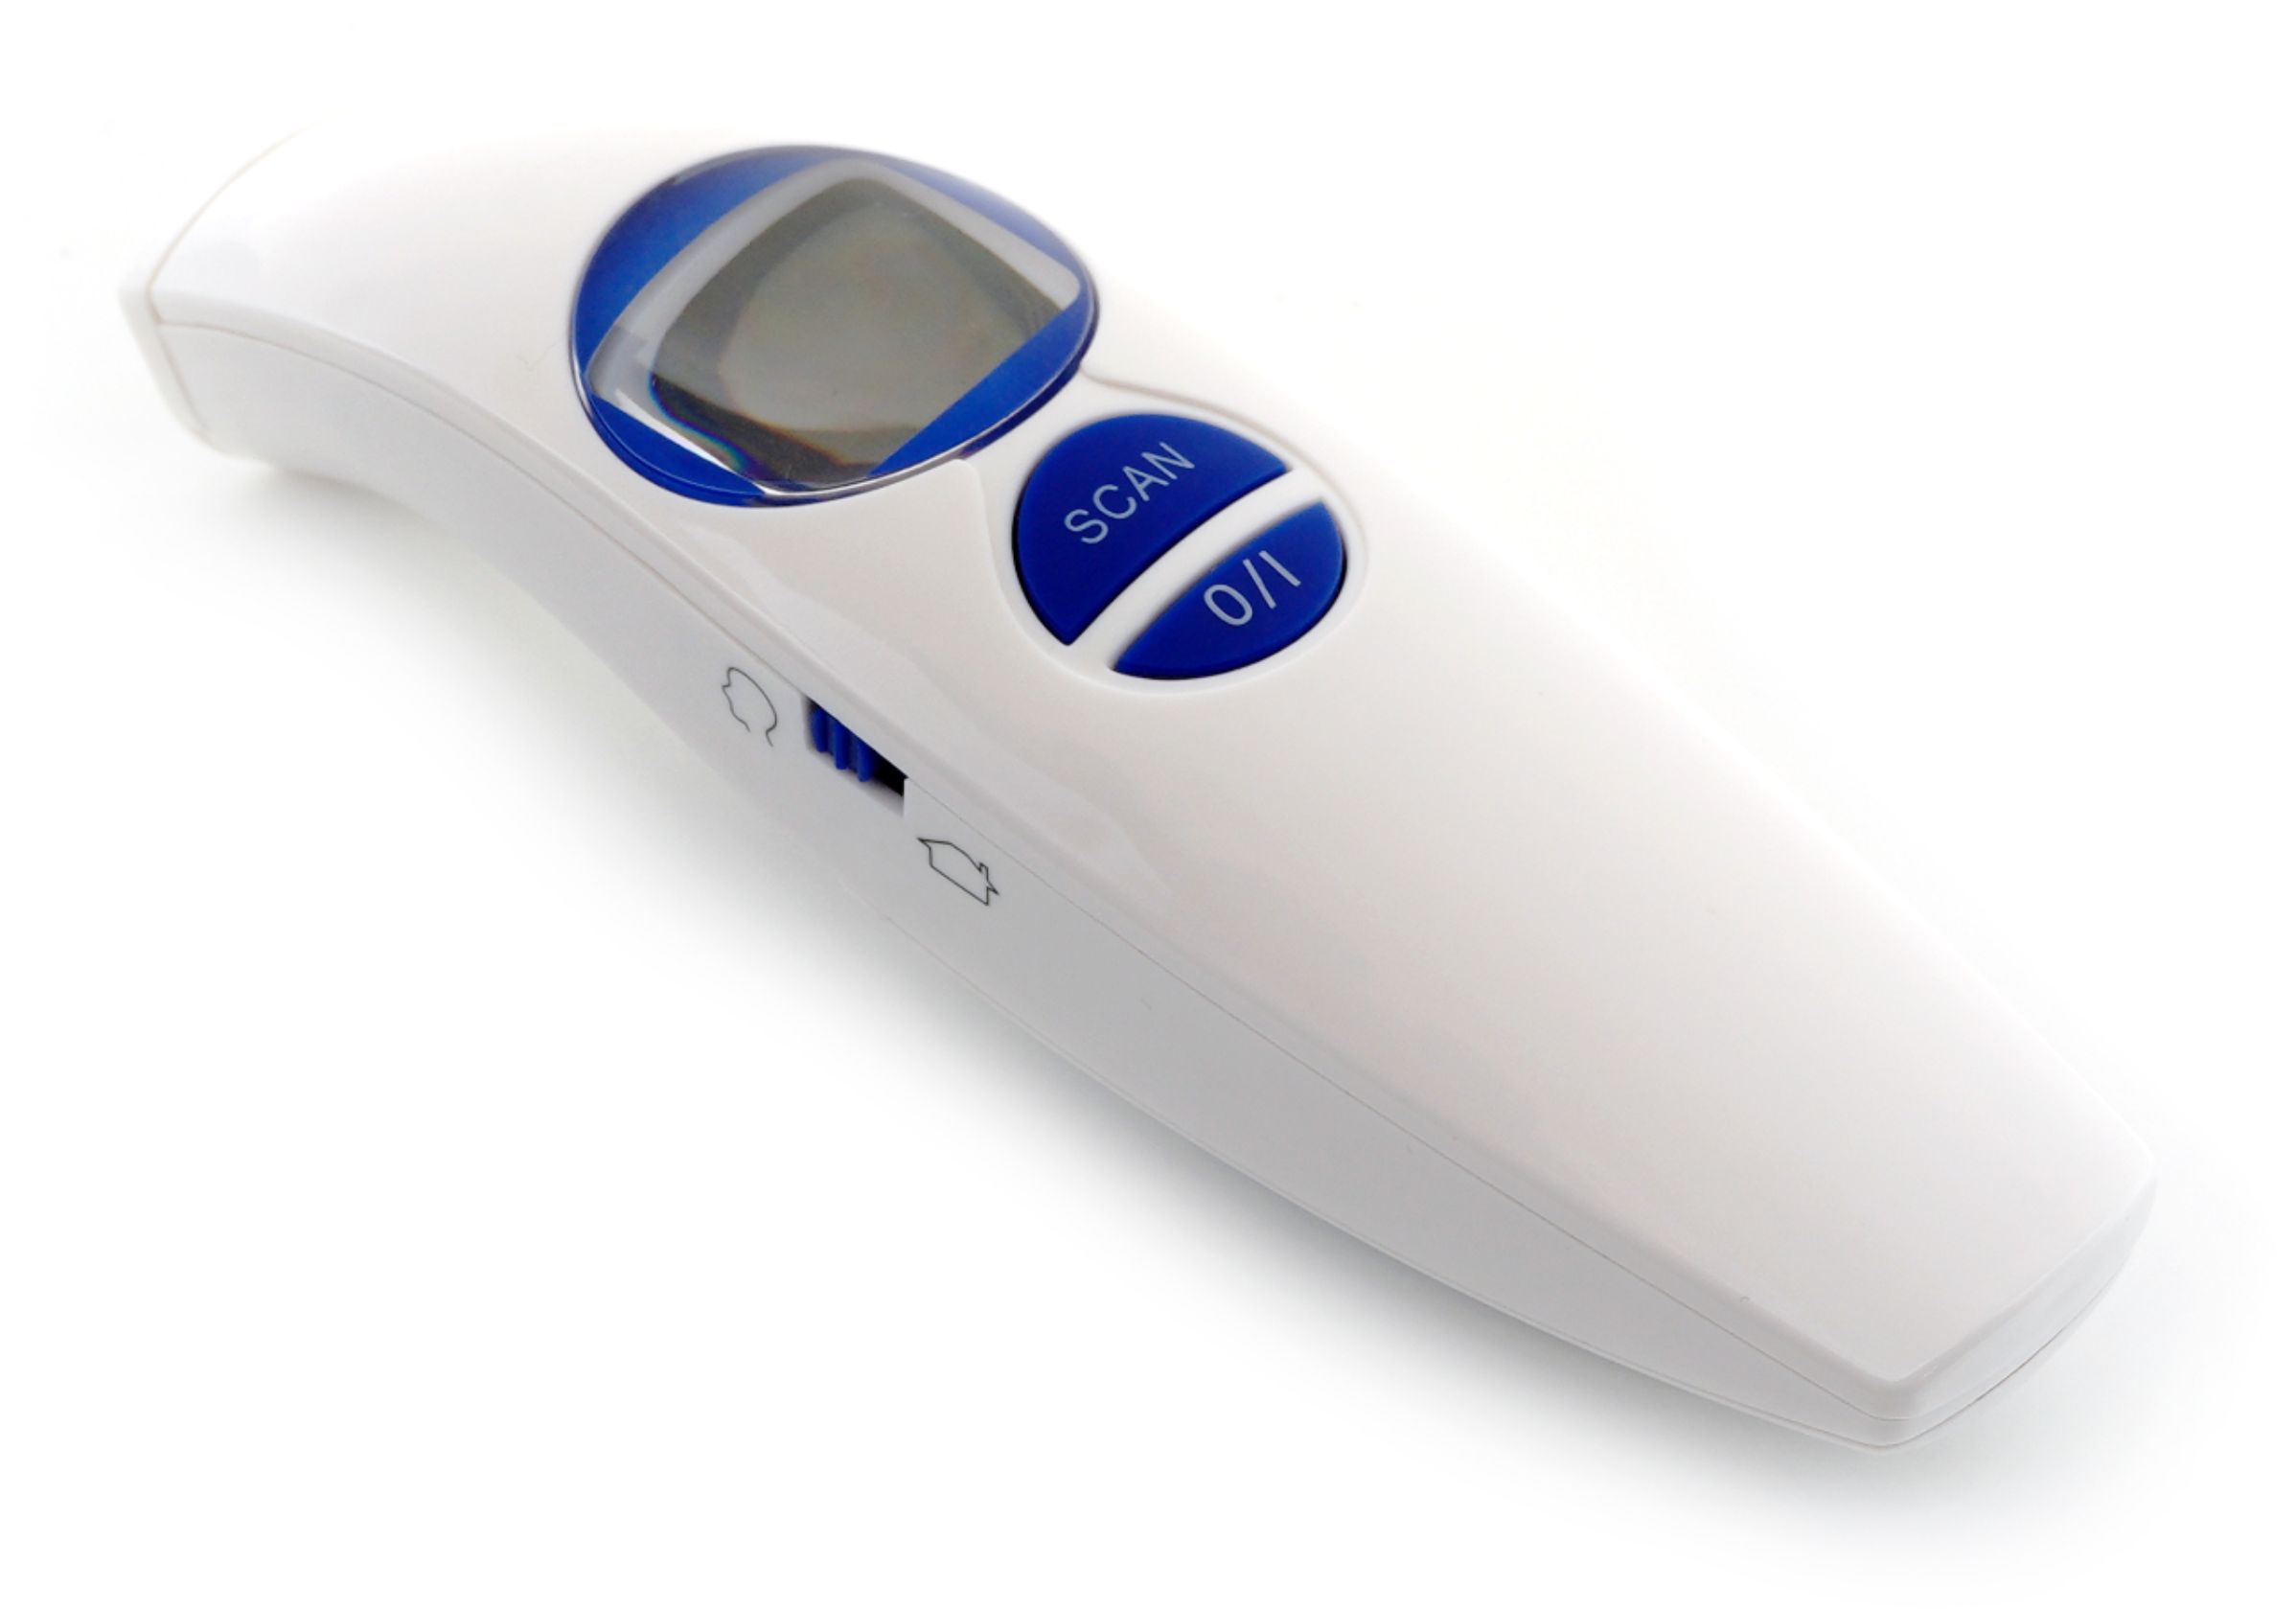 Revitalife Infrared Non-Contact Thermometer - White